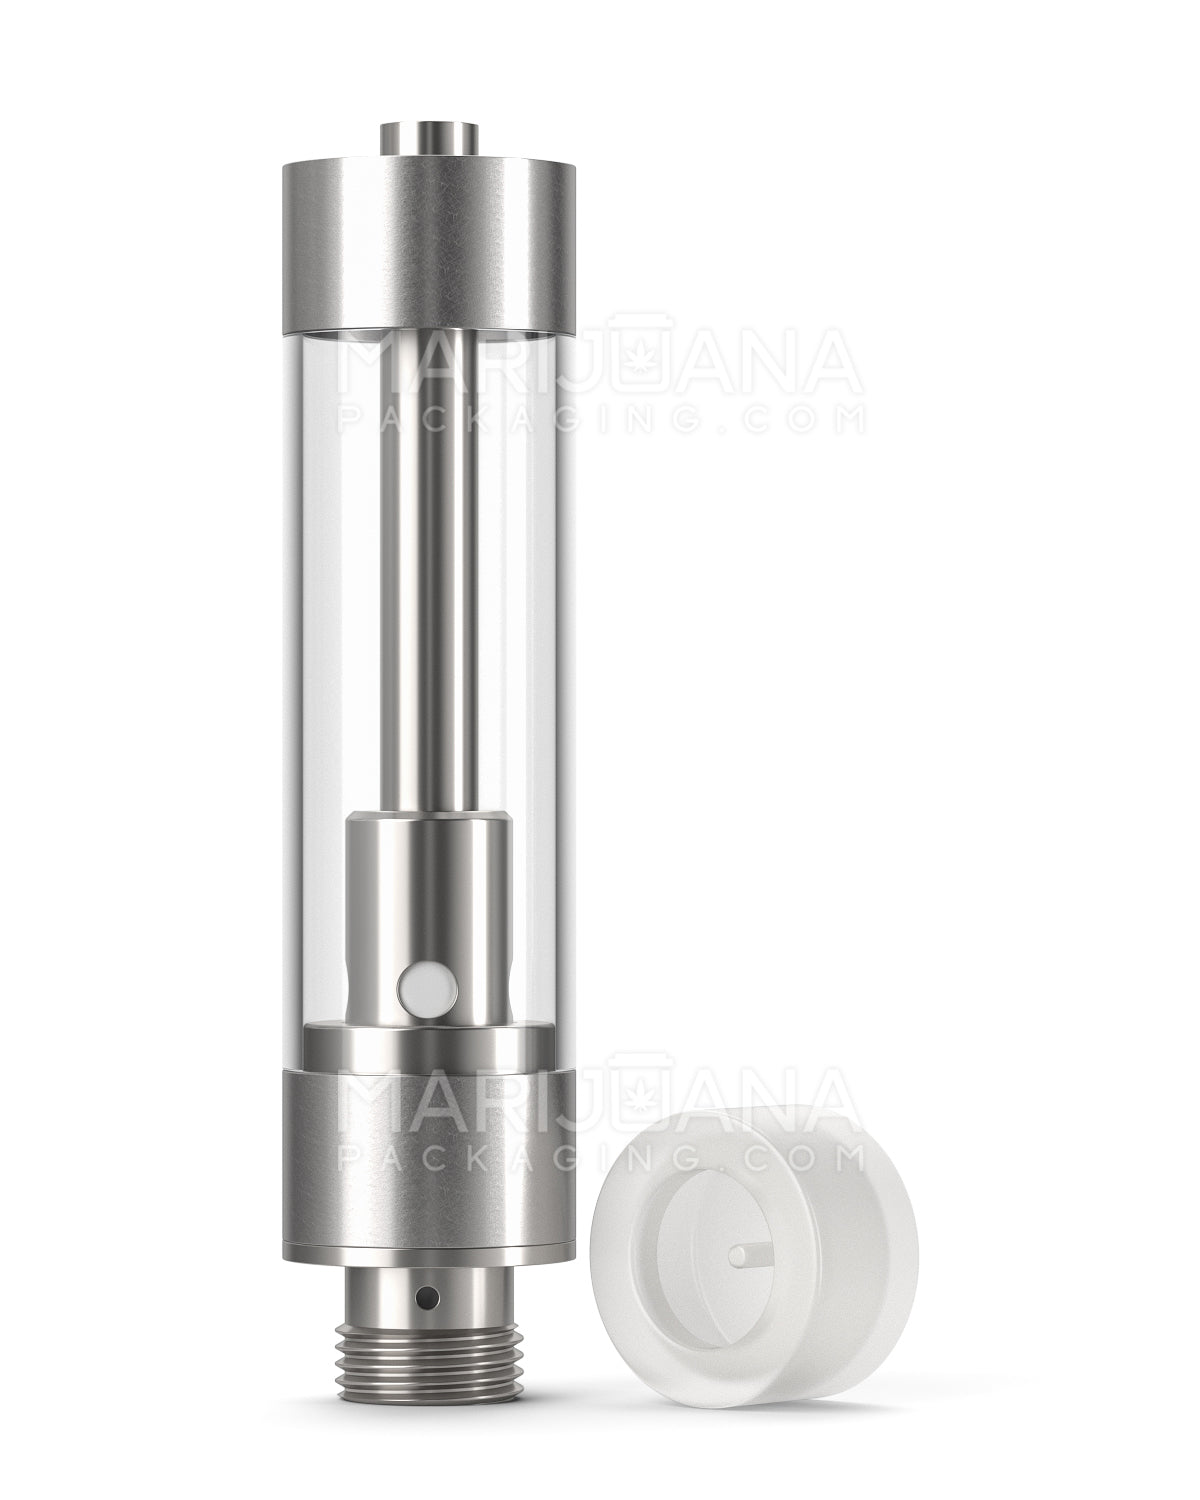 AVD | GoodCarts Plastic Vape Cartridge with 2mm Aperture | 1mL - Press On - 1200 Count - 7